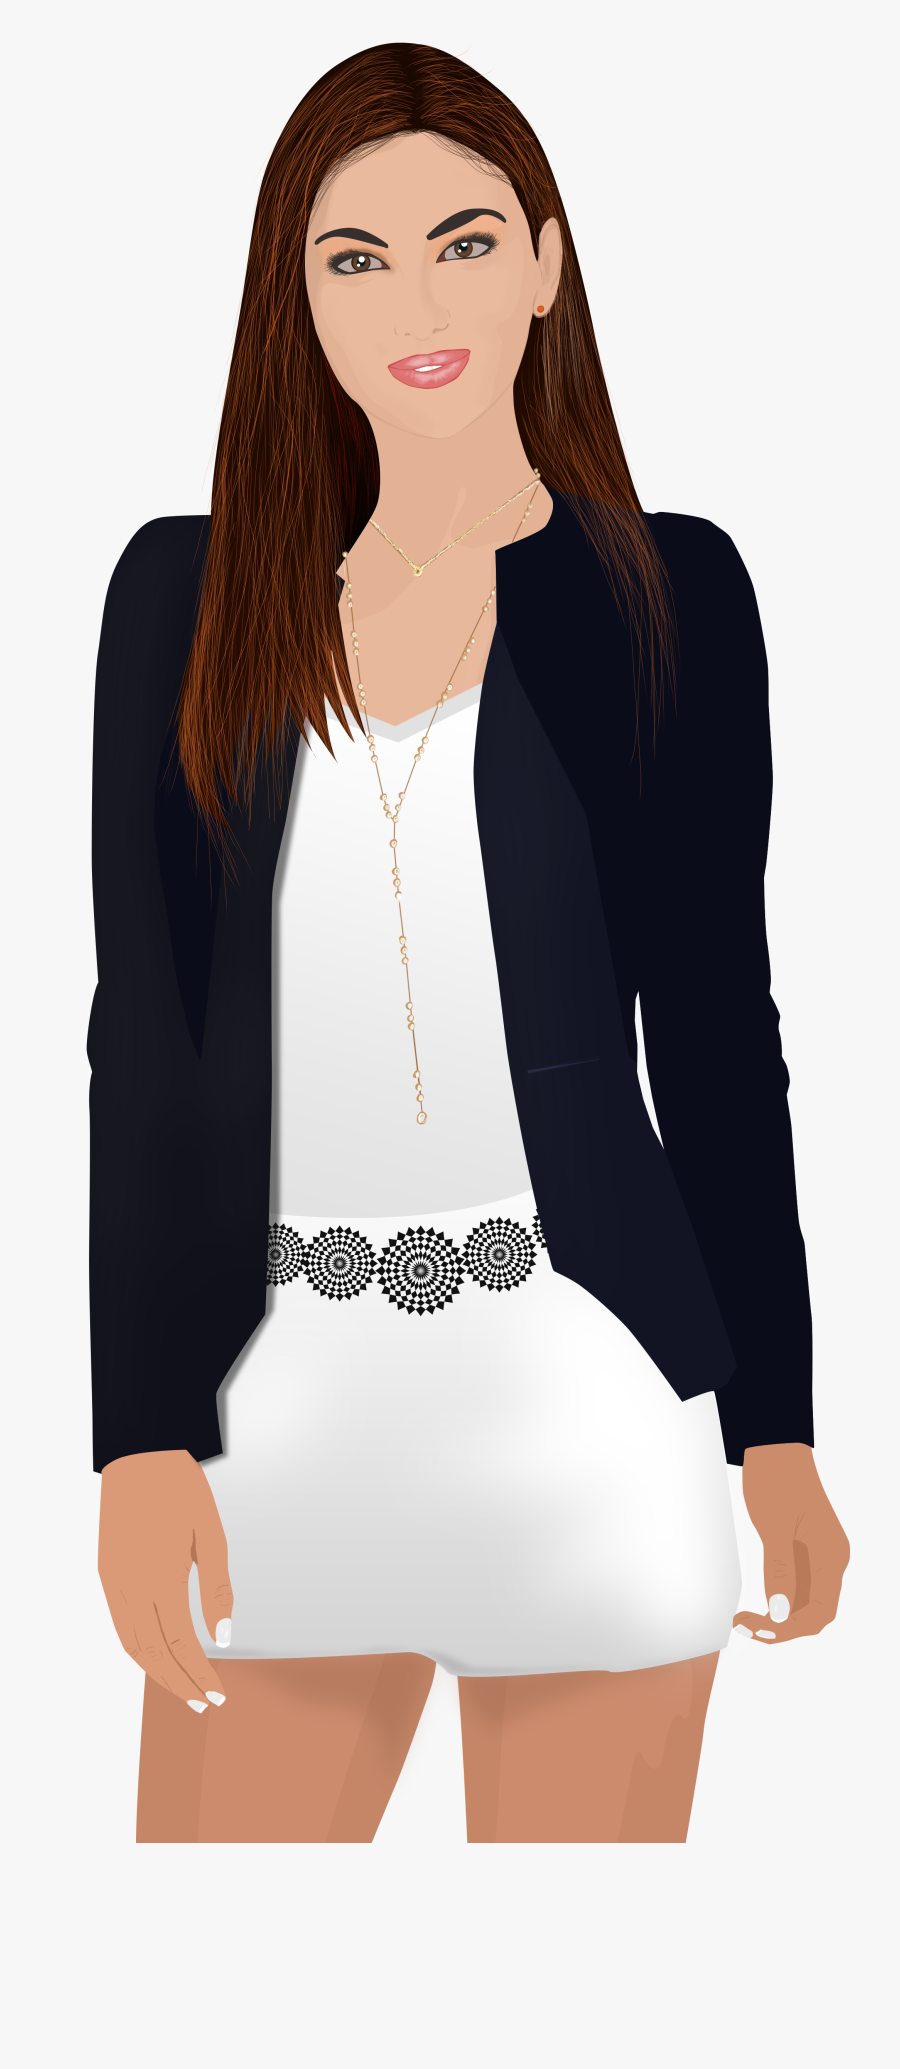 Office Girl Business Woman Female - Business Woman Girl Png Clipart, Transparent Clipart